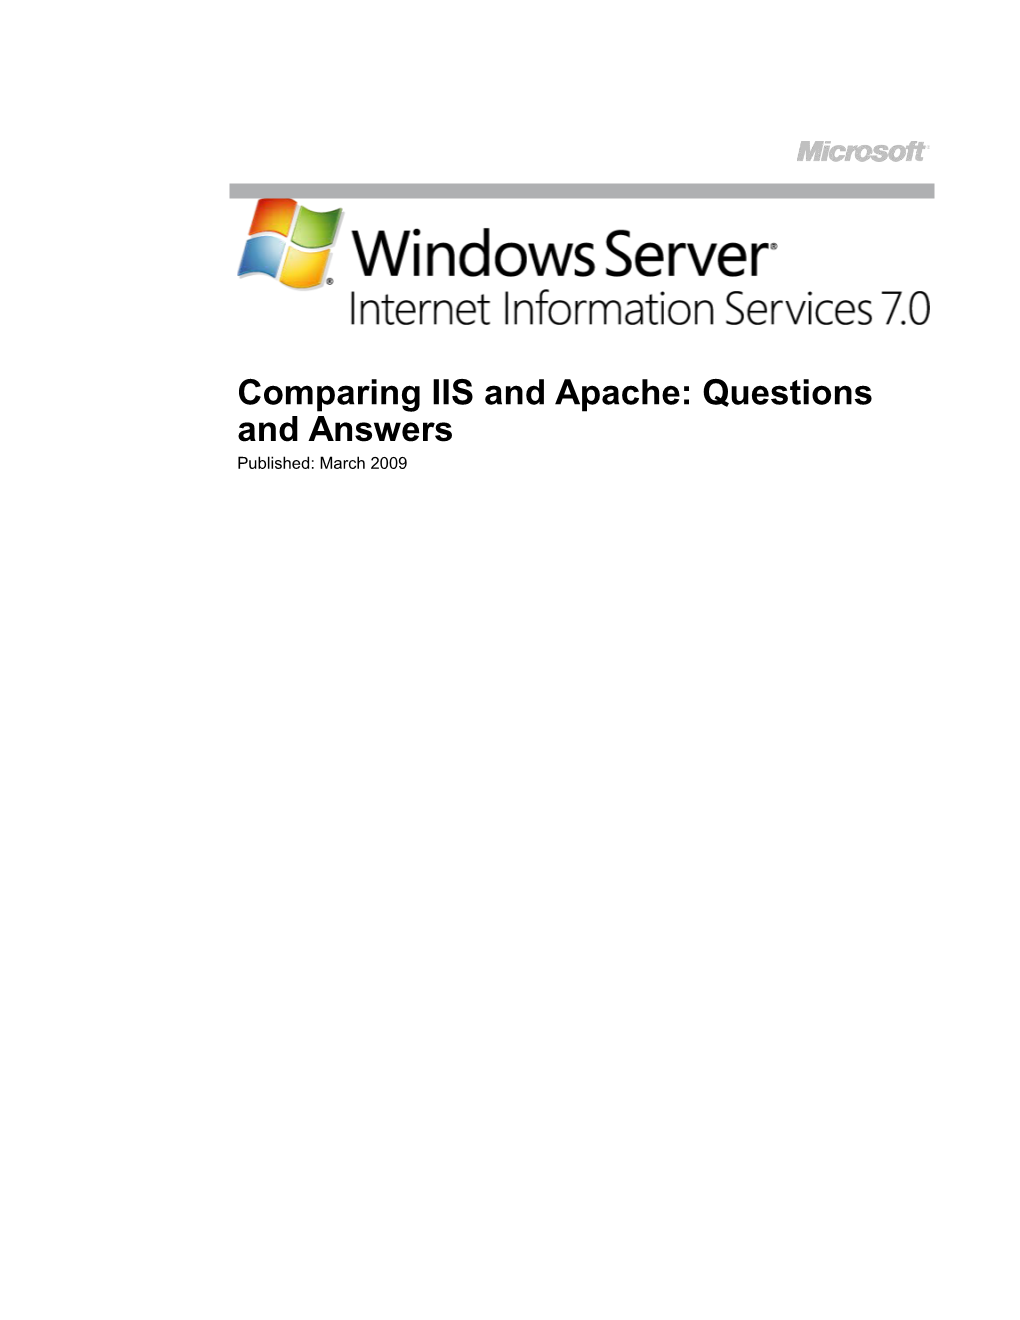 Comparing IIS and Apache: Questions and Answers Published: March 2009 Contents